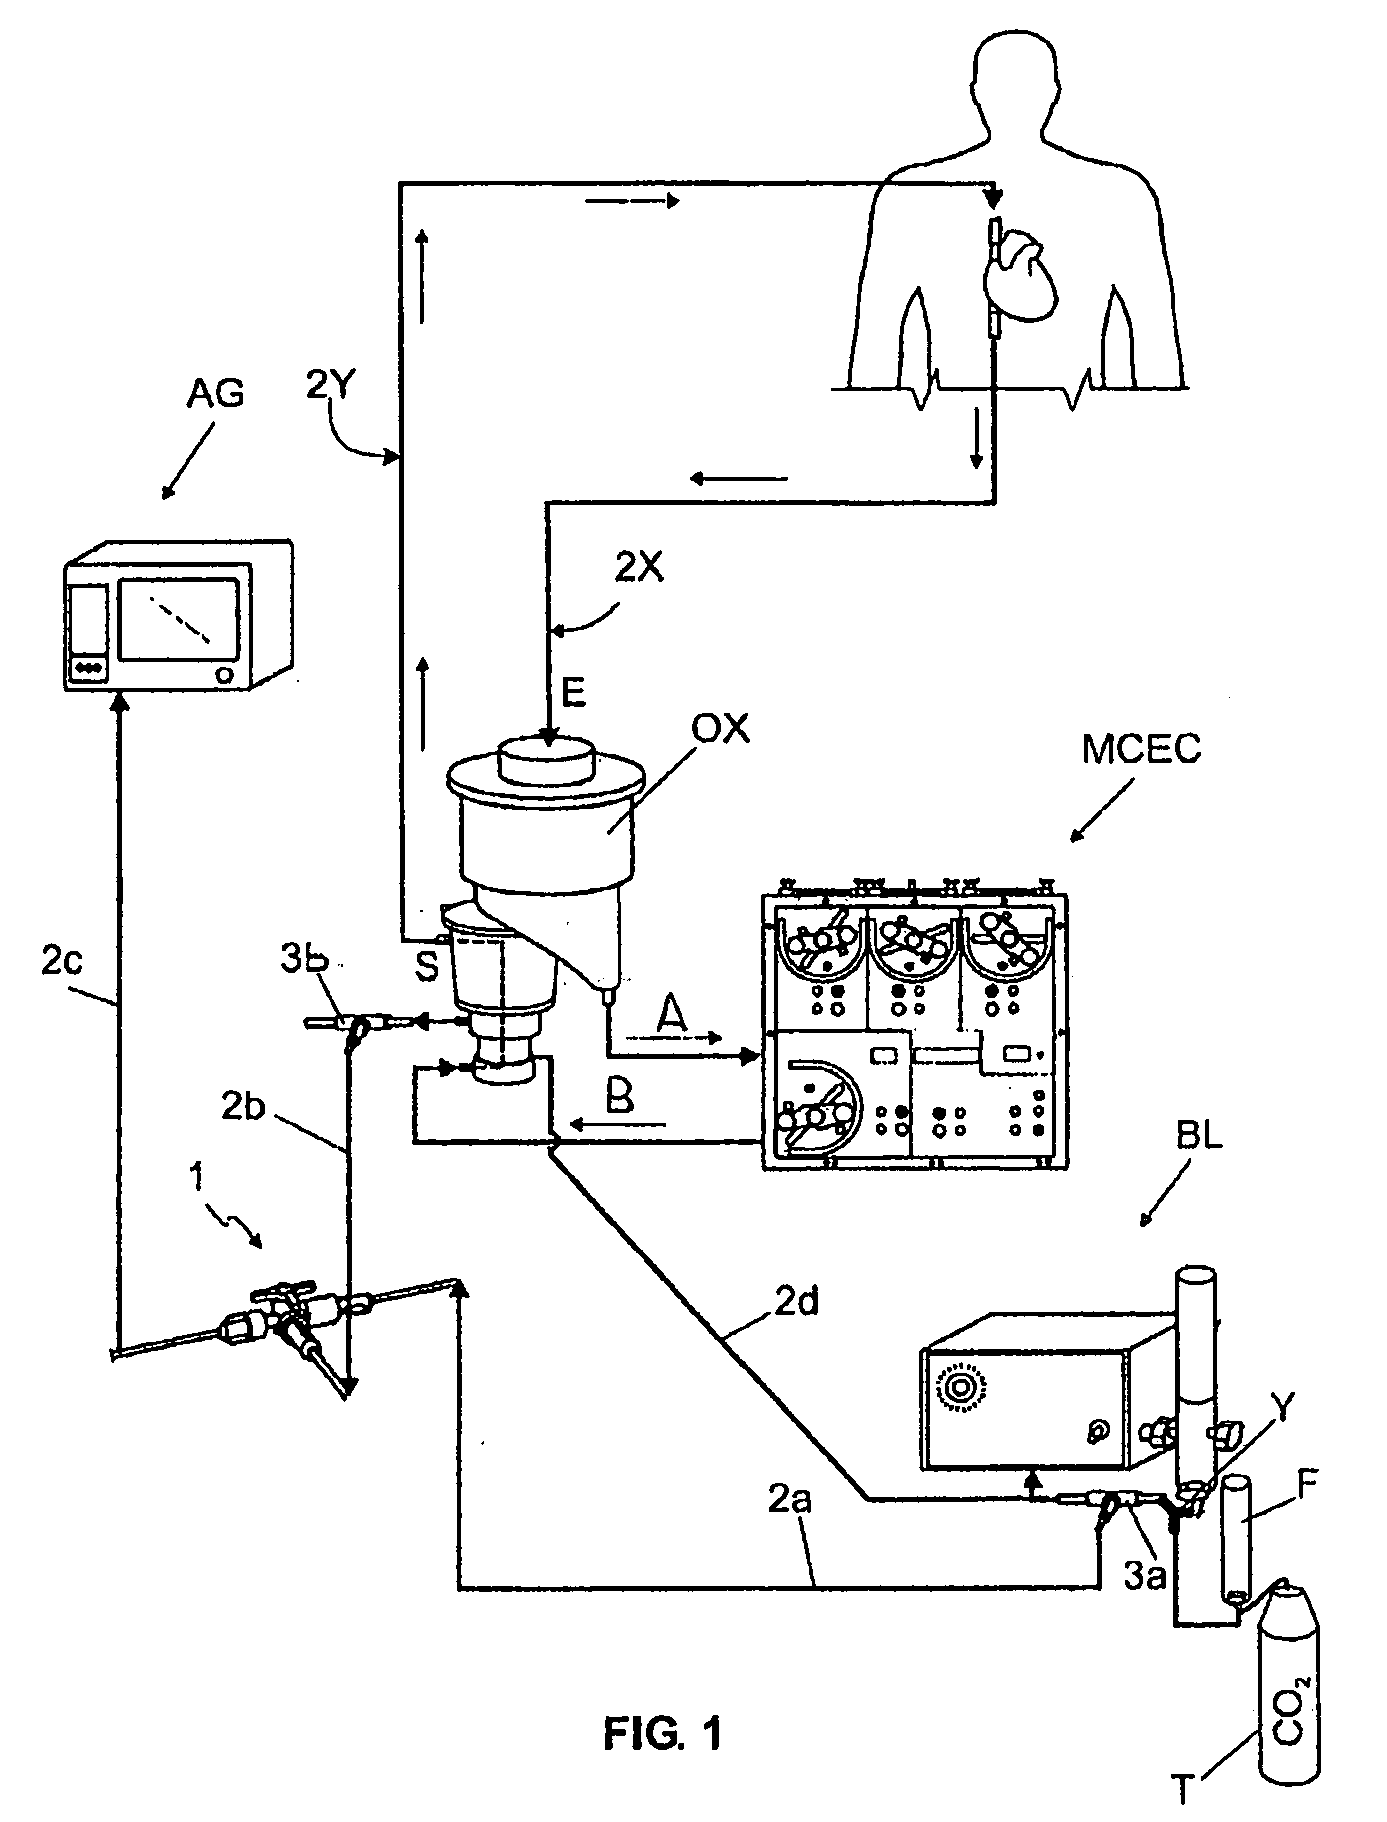 Oximetry and capnography system for use in connection with an extracorporeal circulation procedure